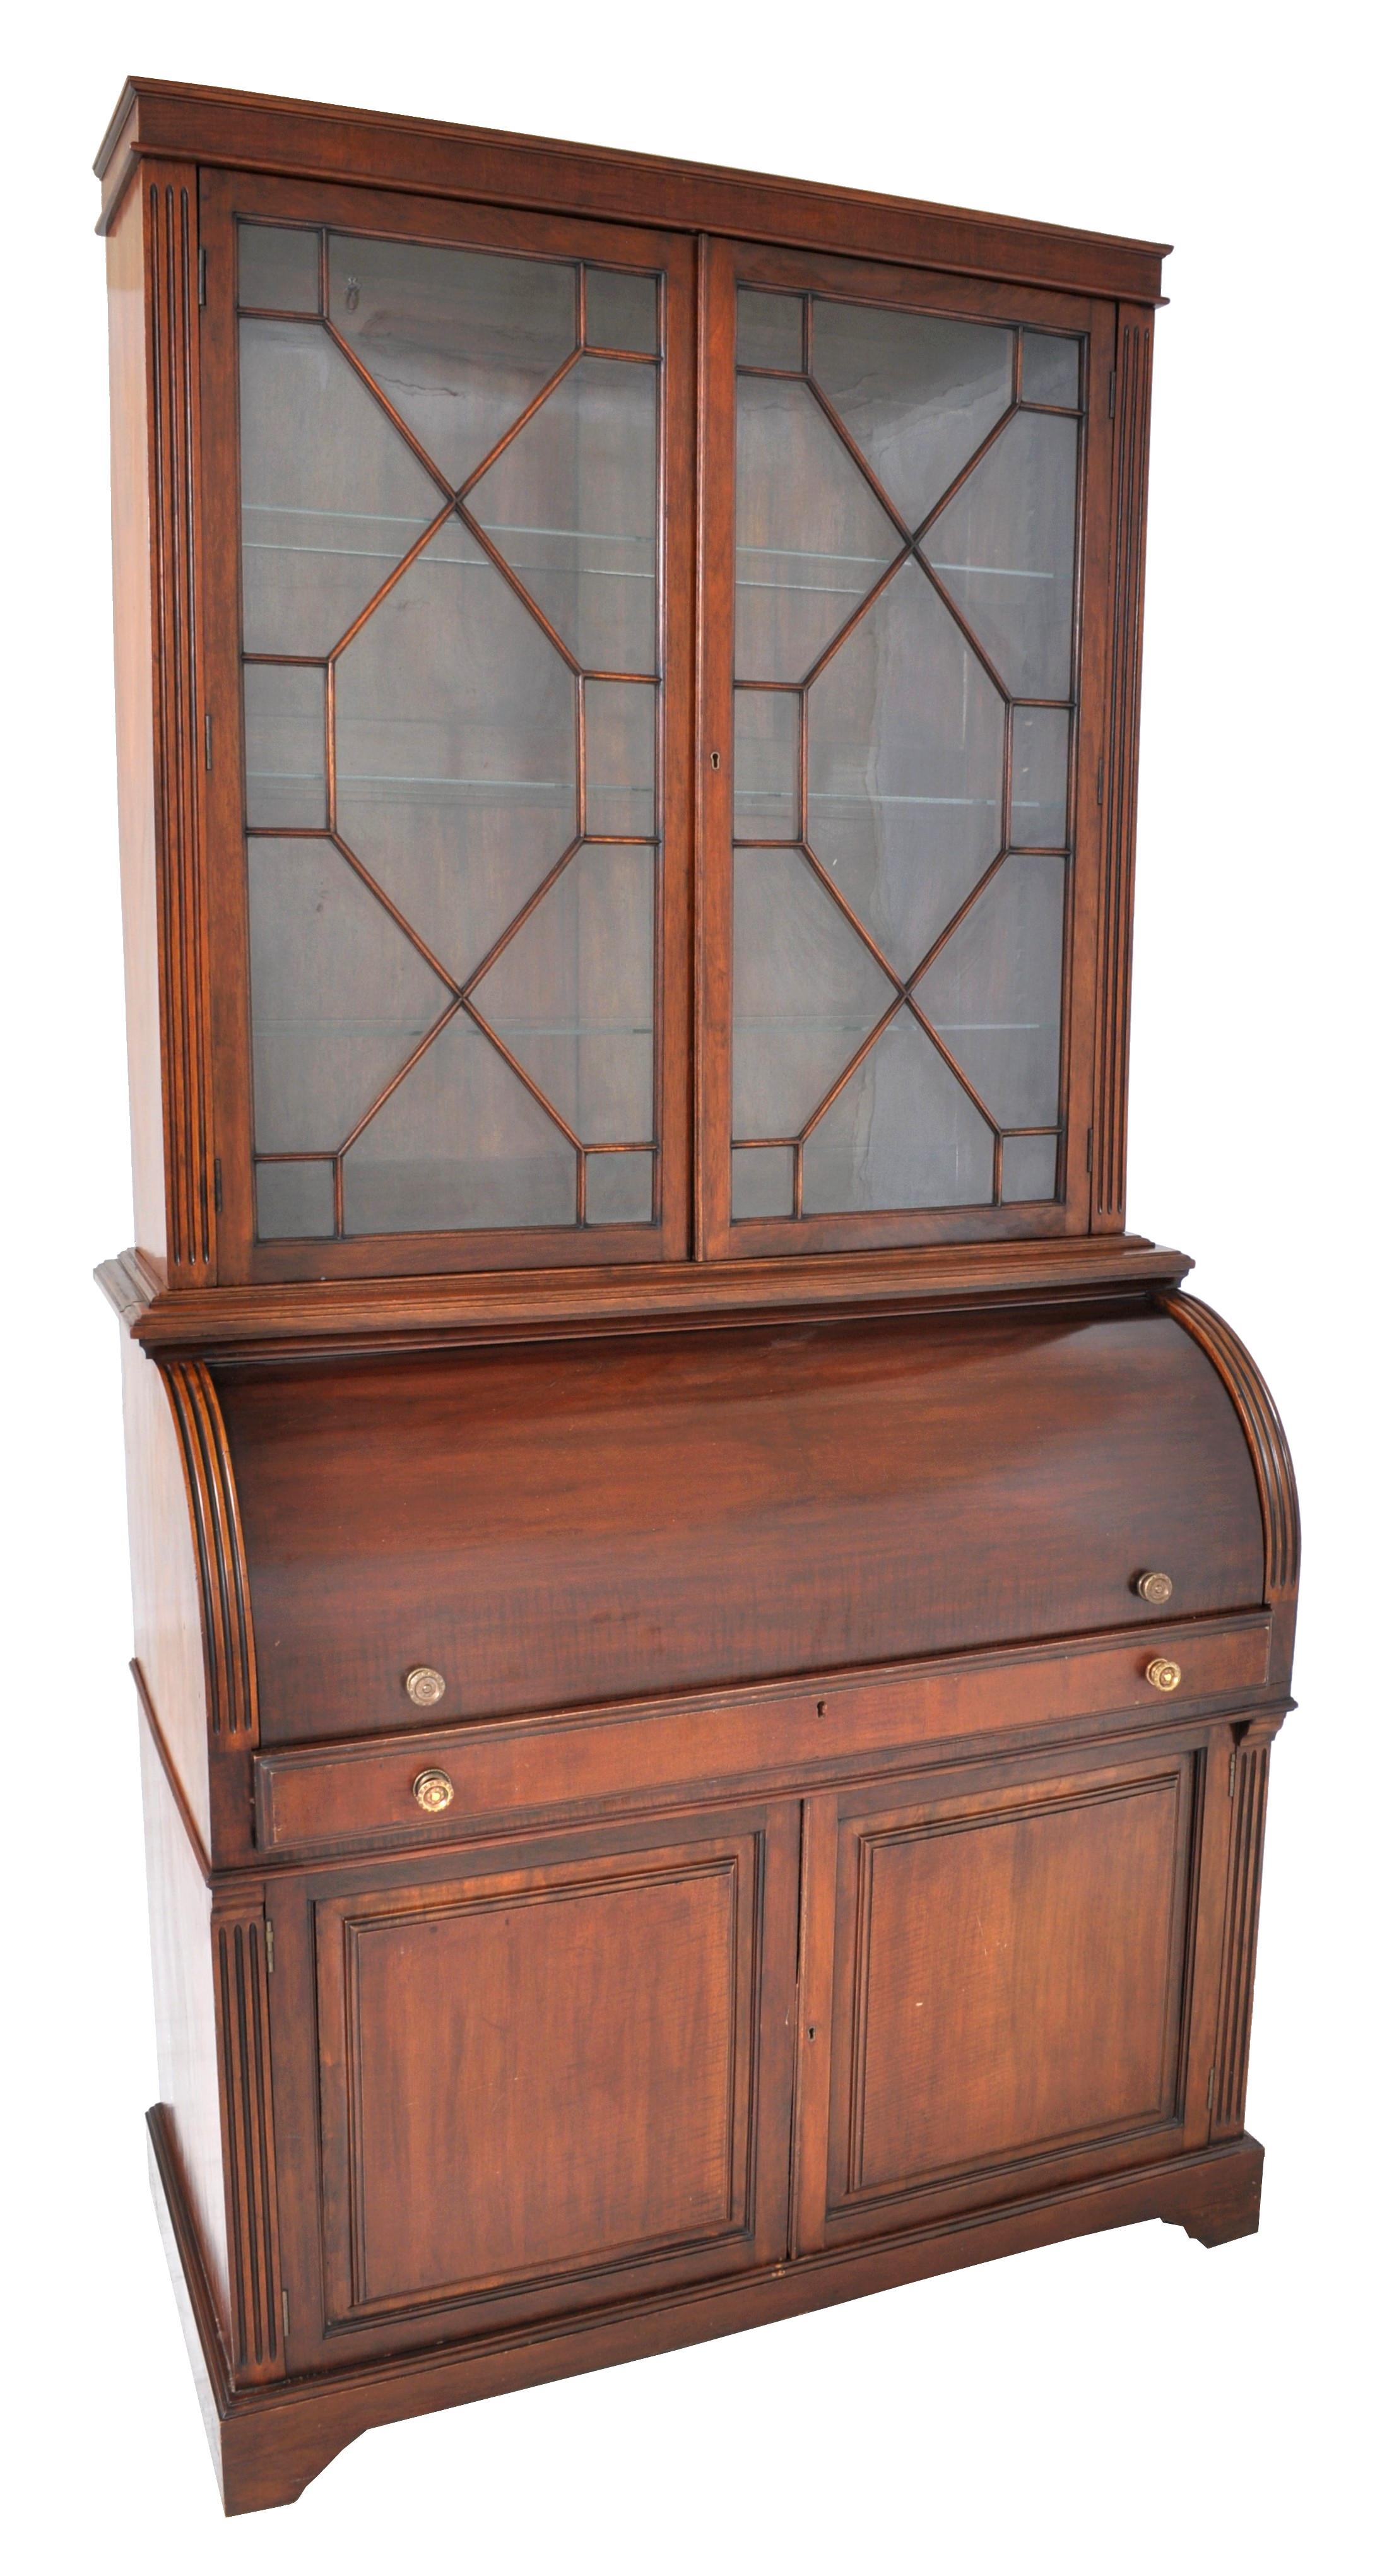 Fine antique 19th century american mahogany cylinder bookcase/secretary/desk, circa 1860. The bookcase having twin doors with astragal glazing and enclosing three shelves. The base having a cylinder roll top enclosing a fitted interior with drawers